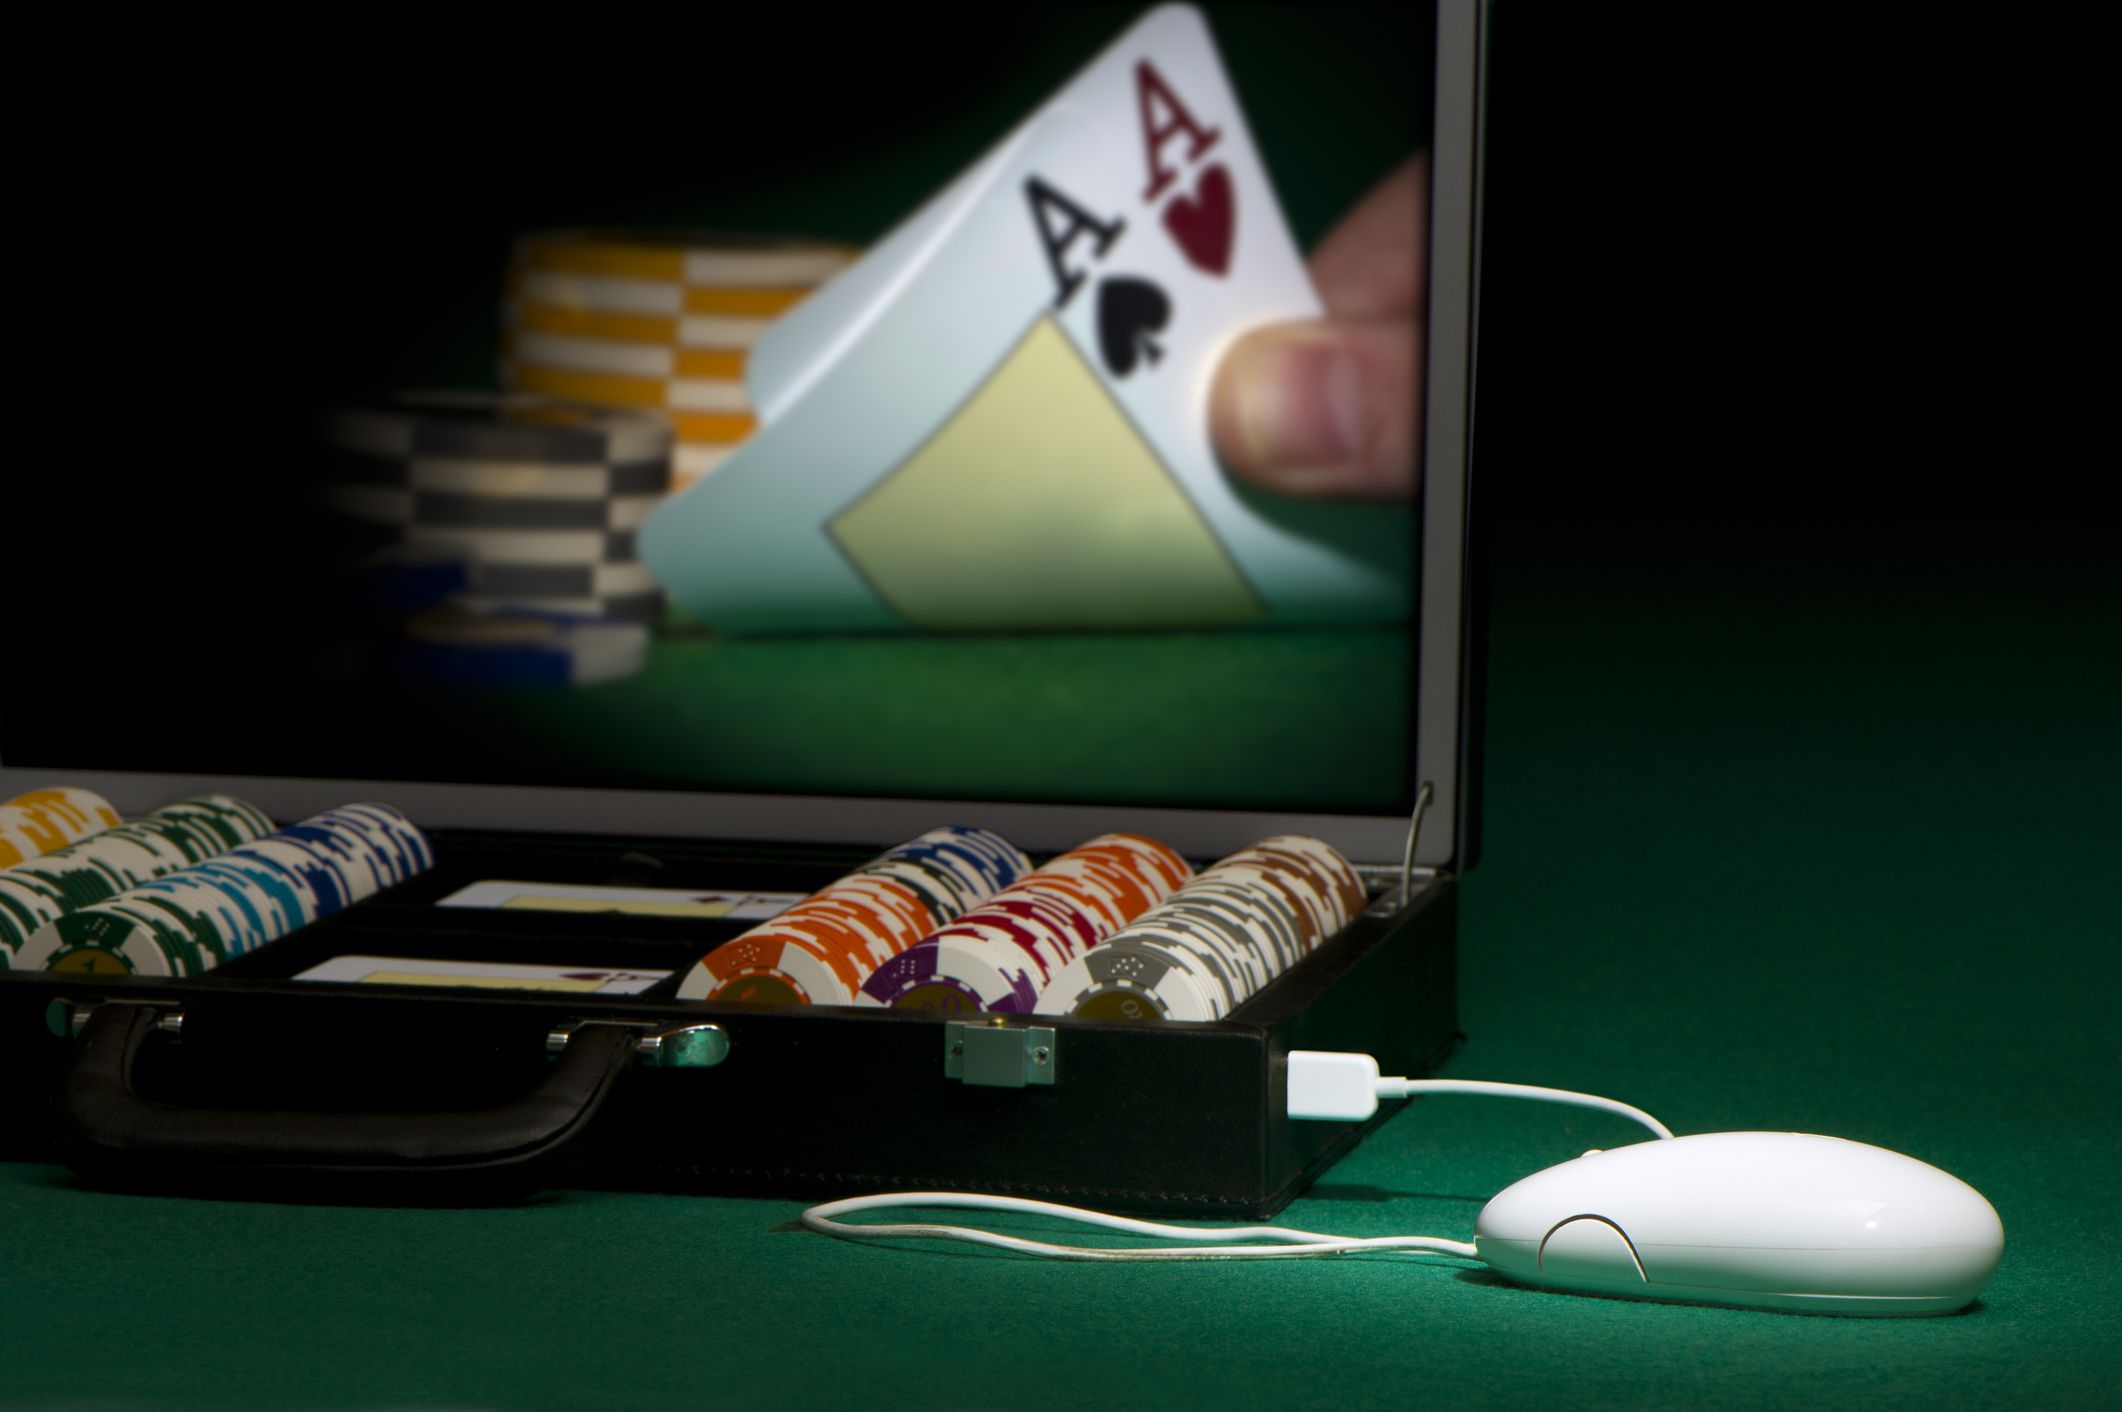 Online Slot Game Is a Very Popular Casino Game